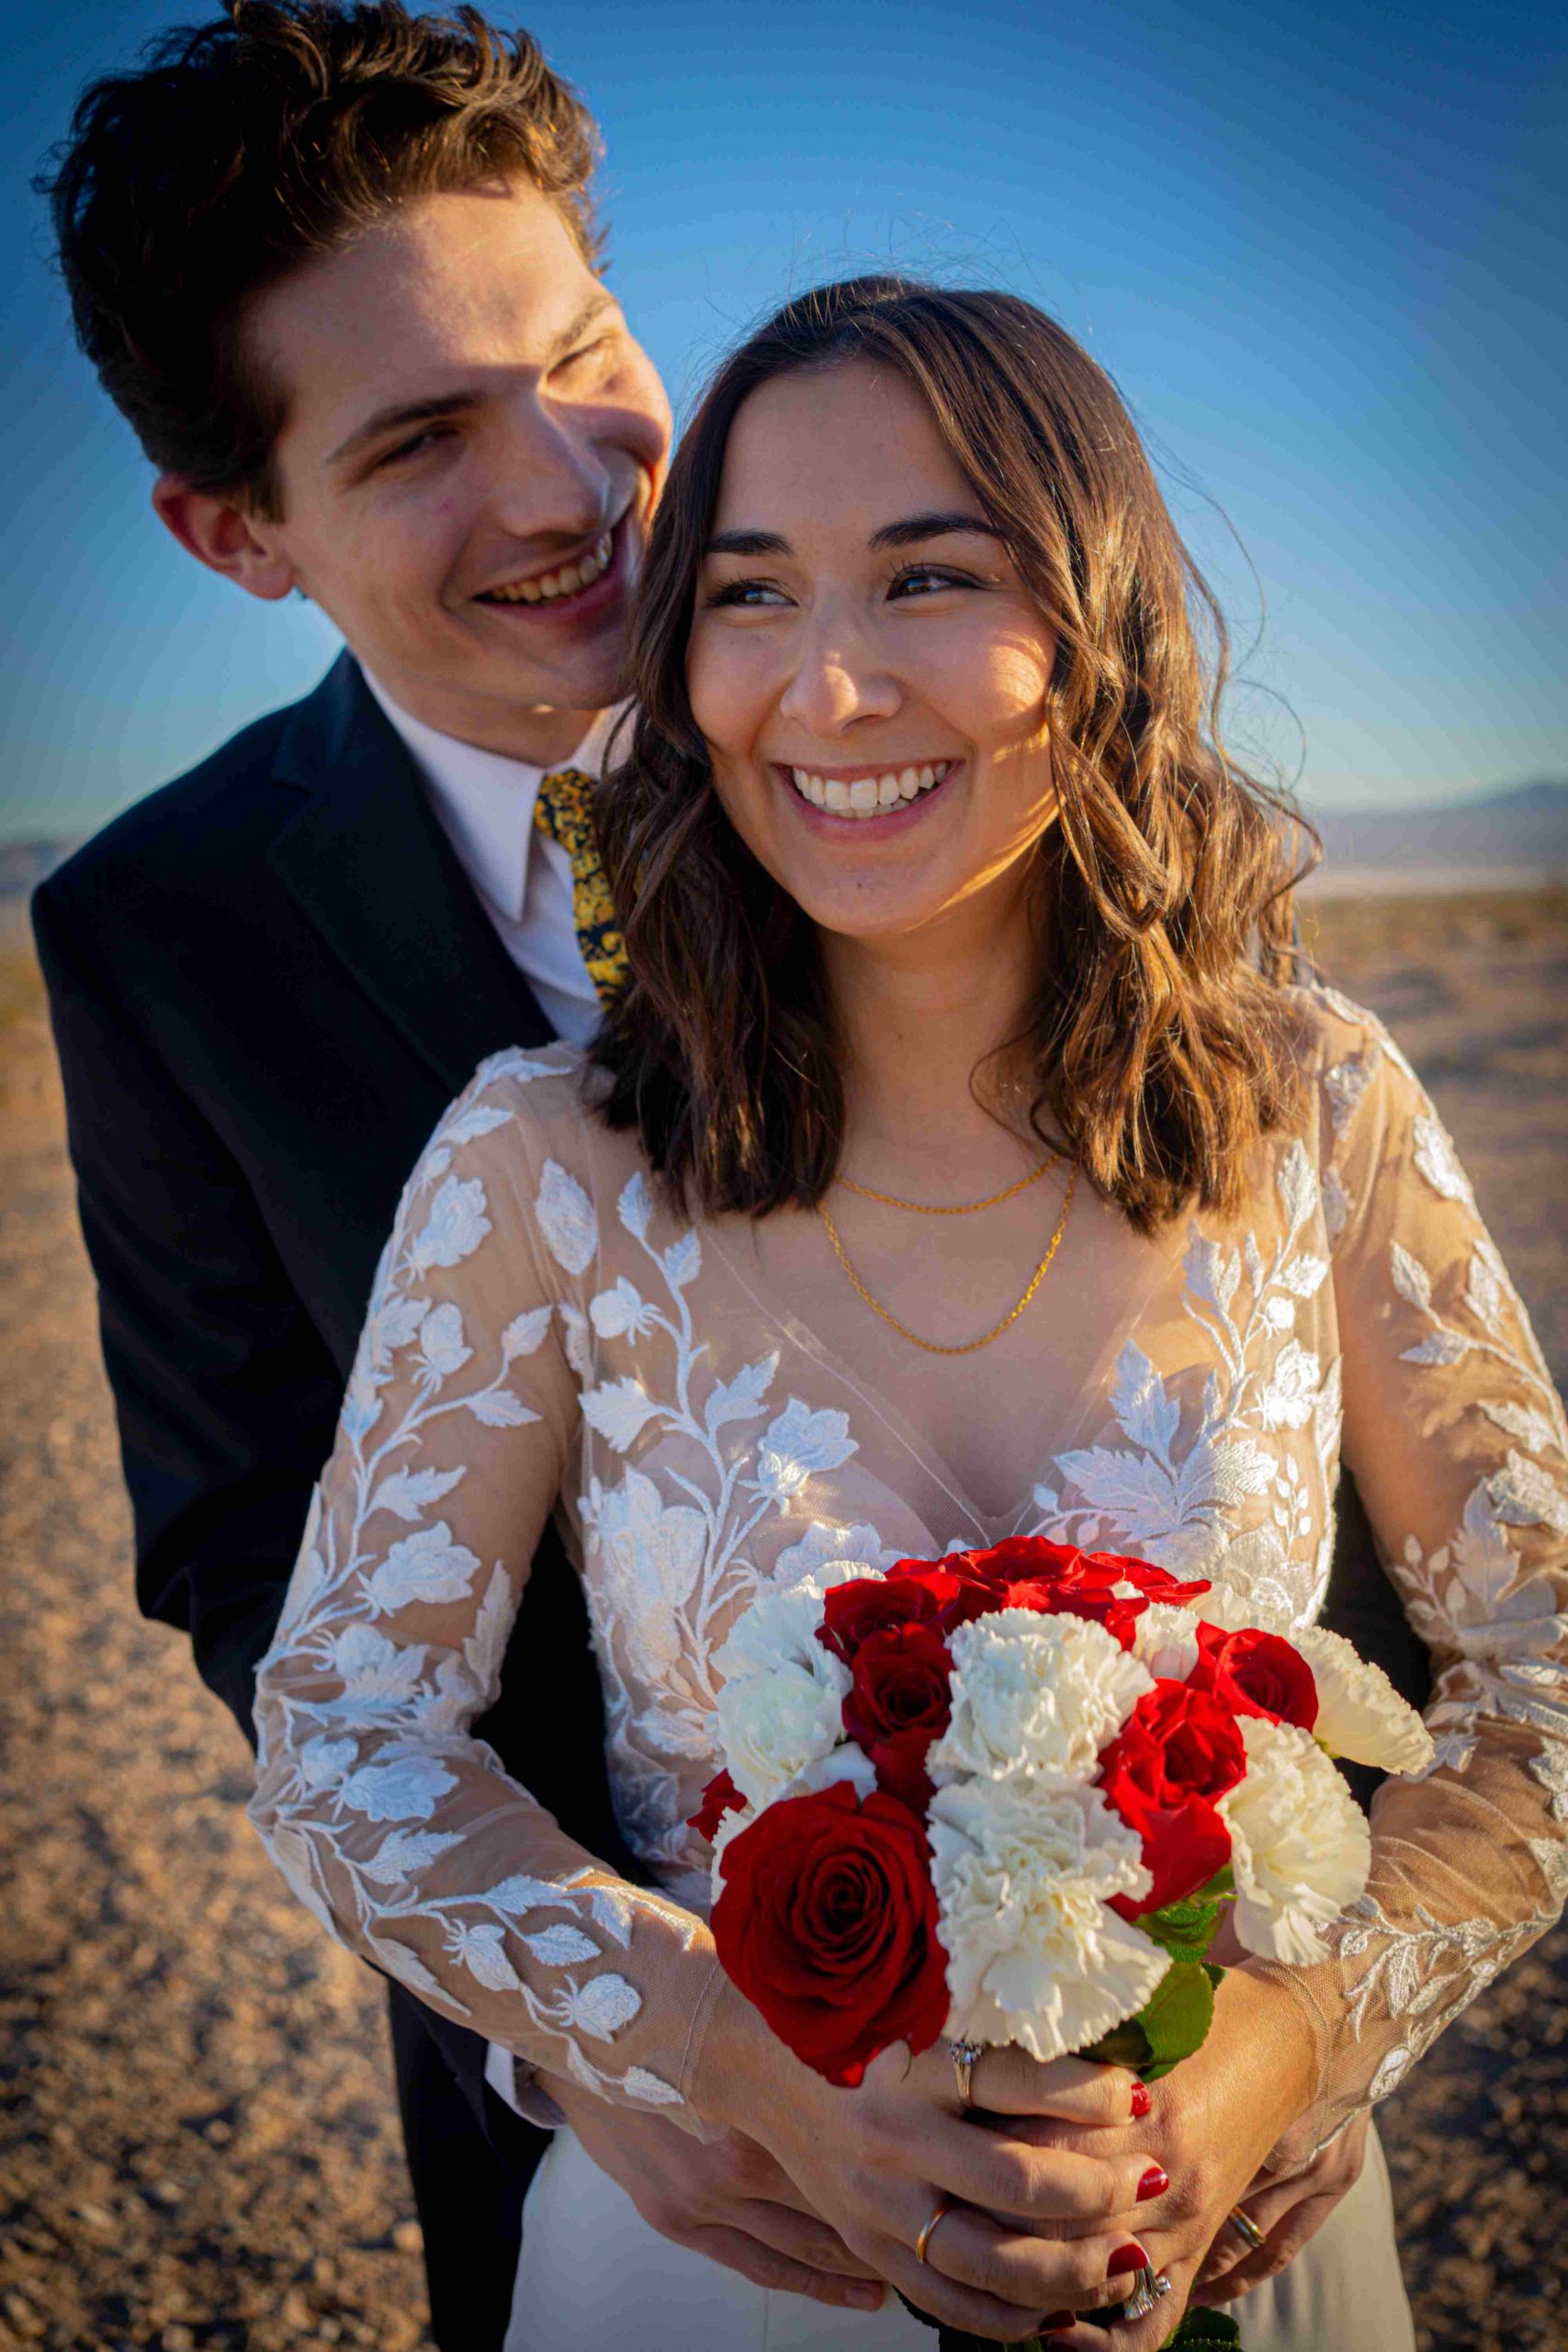 Fine Art Las Vegas Wedding Photography: Bringing Out The Artistry At Weddings